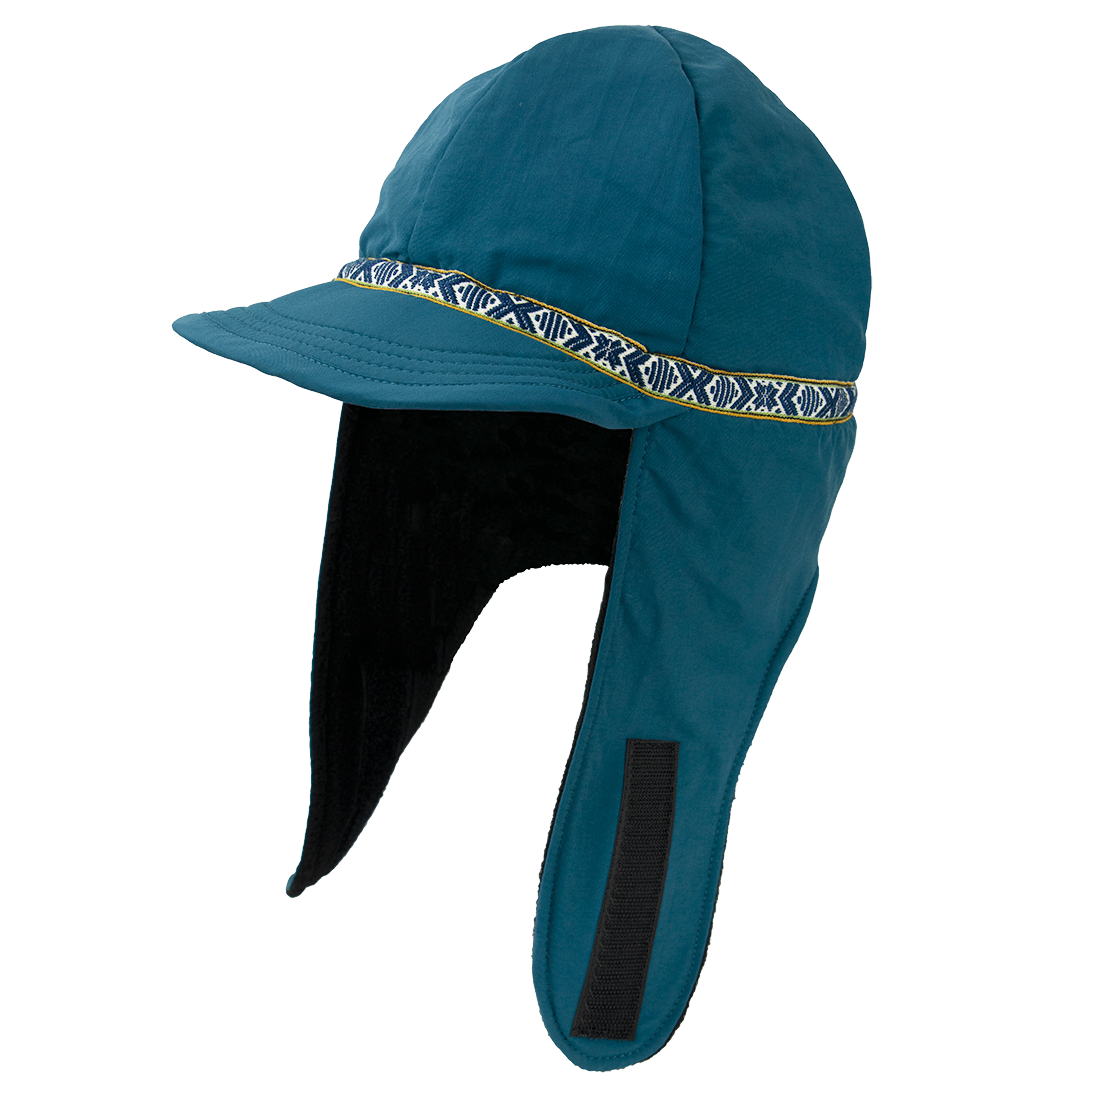 Expedition Shell Hat-Made in Ely, MN. X-Large / Teal Shell (blueberry Twist Trim)